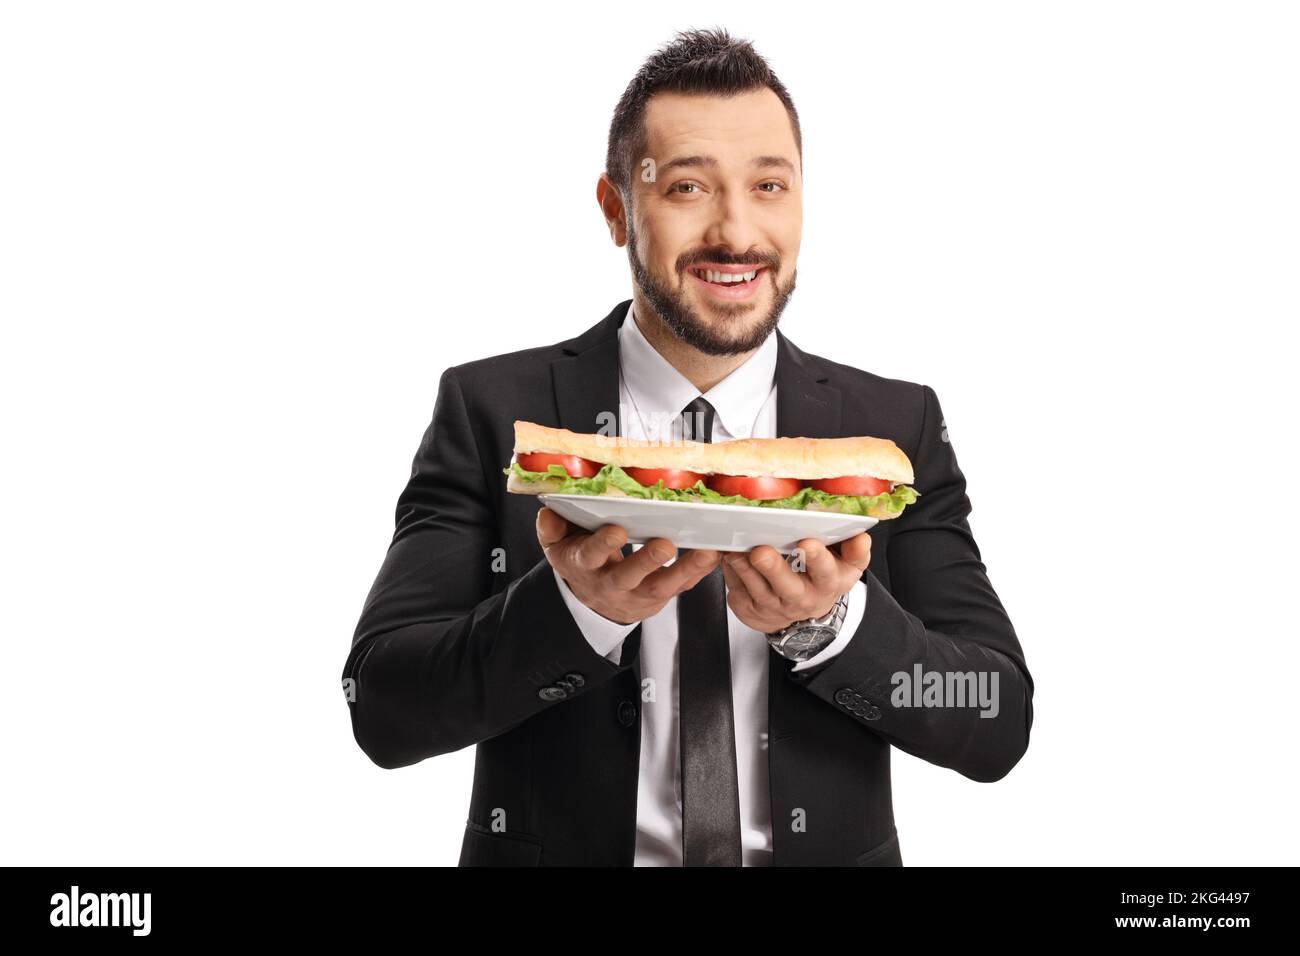 Businessman holding a sandwich on a plate isolated on white background Stock Photo